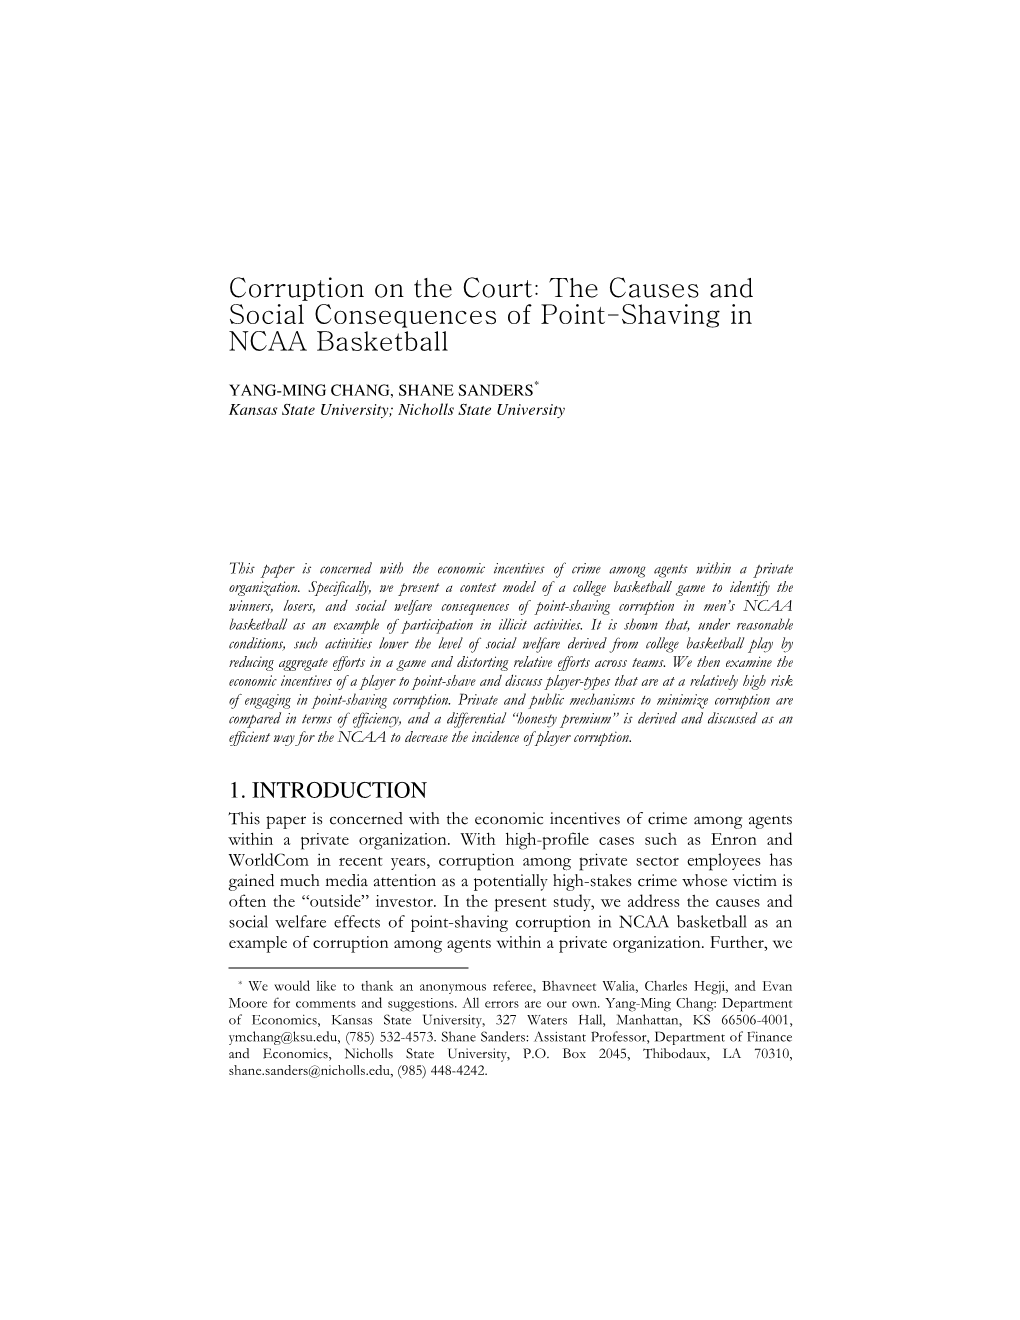 Corruption on the Court: the Causes and Social Consequences of Point